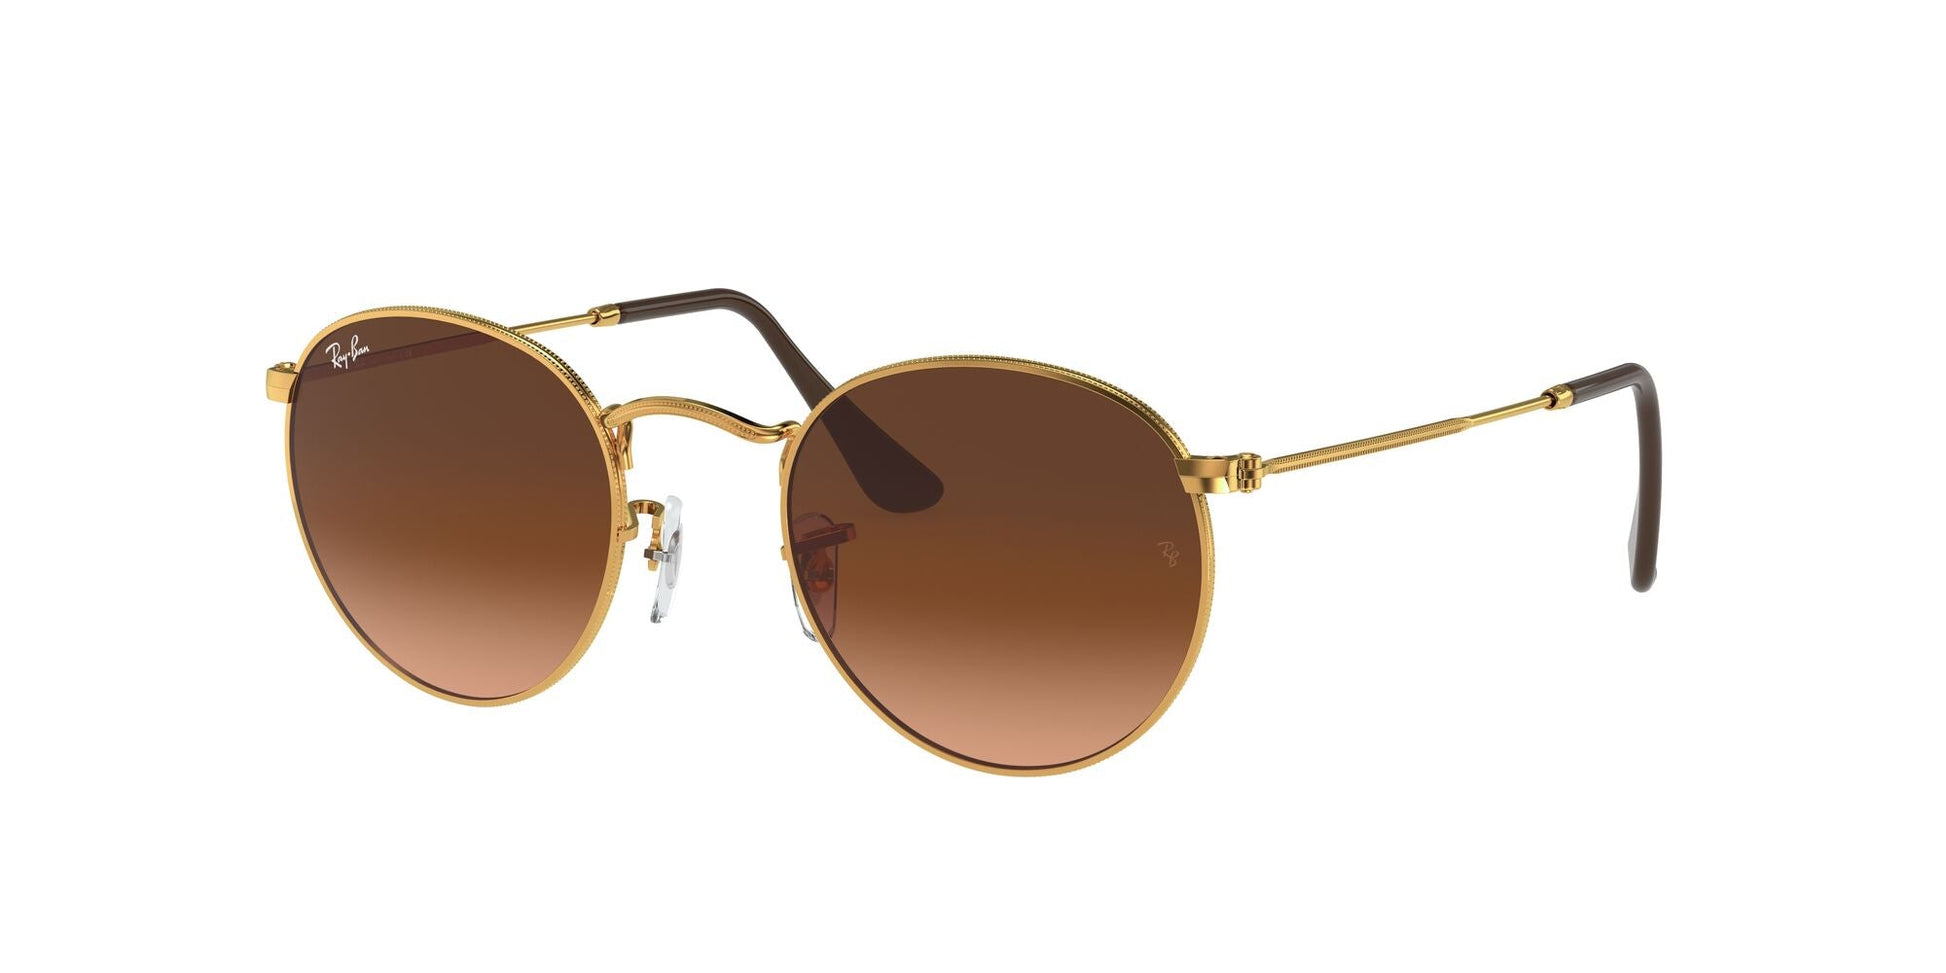 Ray-Ban 0RB3447 9001A5 Marrone